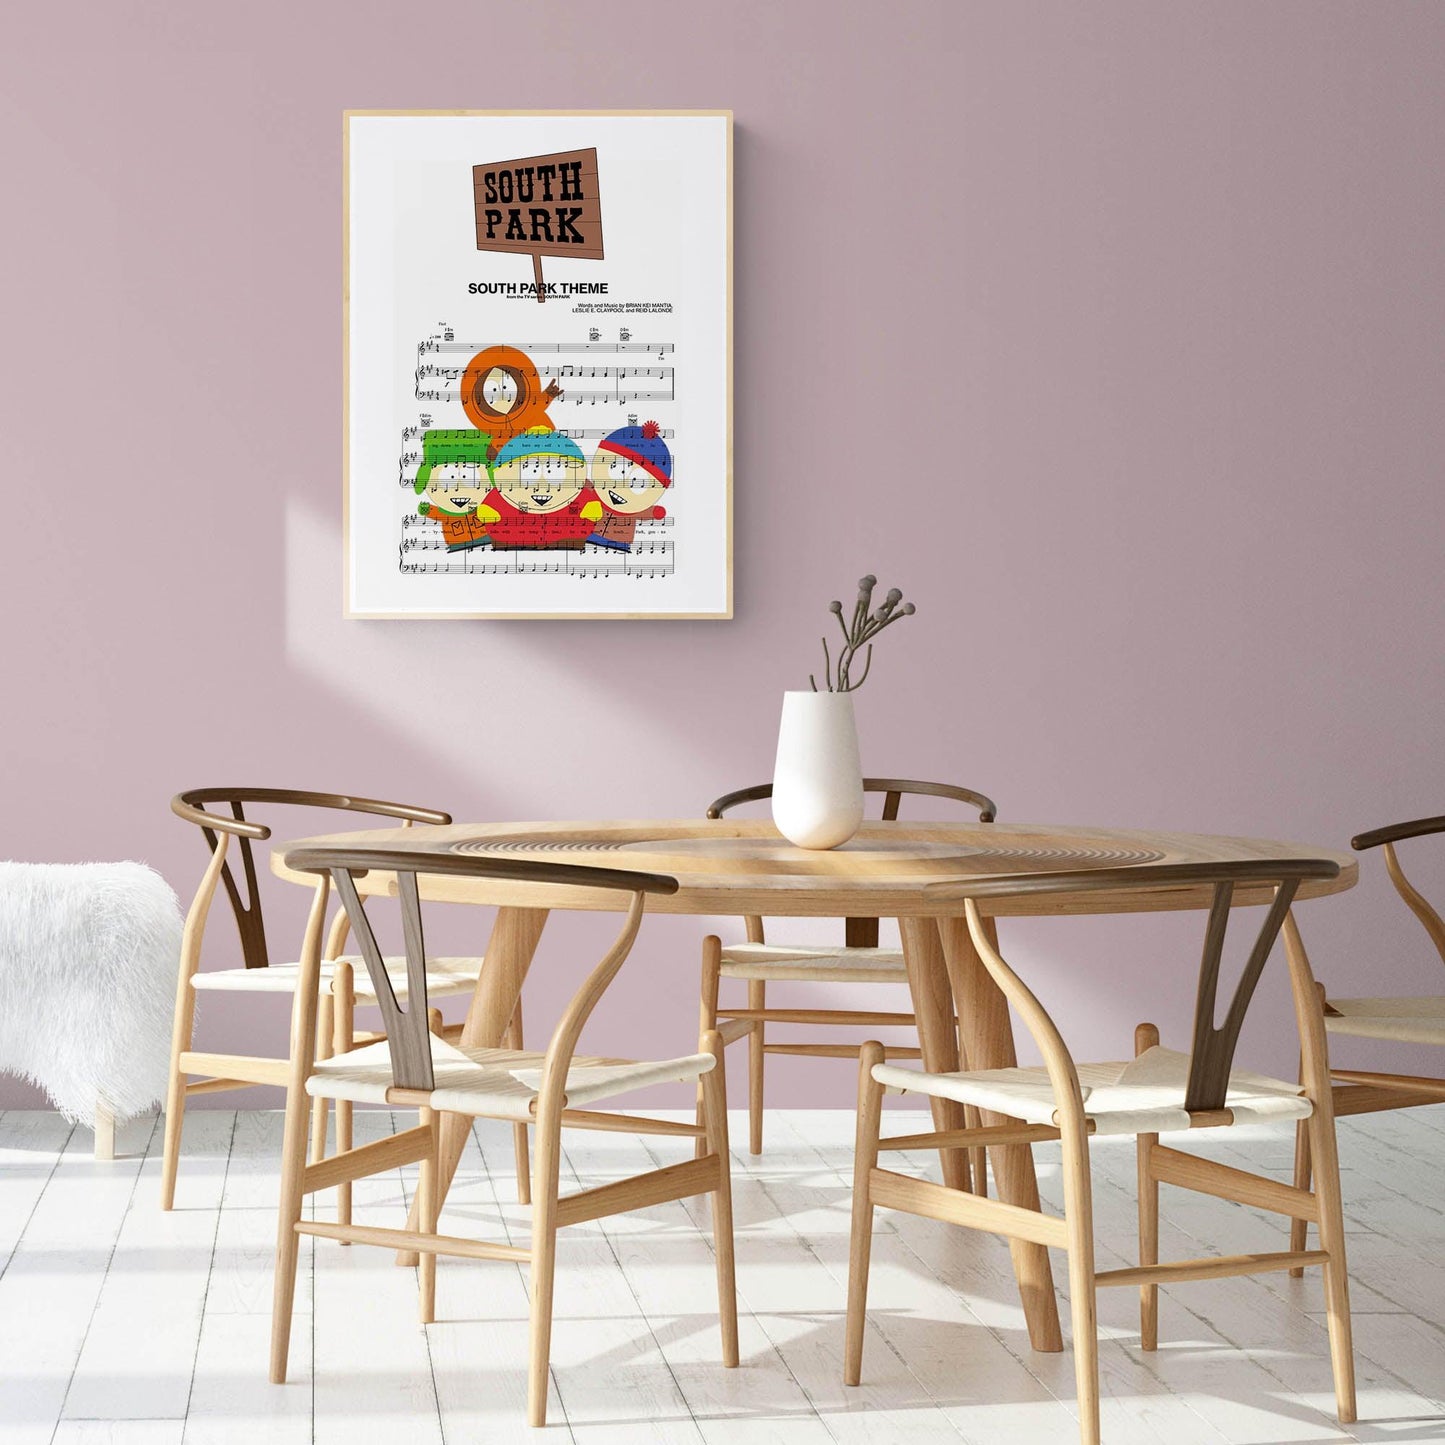 Add a bit of music to your walls with this SOUTH PARK Main Theme Poster. Featuring the song lyrics to the classic South Park theme, this unique wall art is perfect for any fan. It makes a great gift, too! Let the iconic words fill your space with good vibes and energy. Printed on high-quality paper, it's durable and easy to frame as desired. No matter where you hang it, this poster is sure to liven up any room. Sing along and get ready to be taken into a world of music, art, and fun!